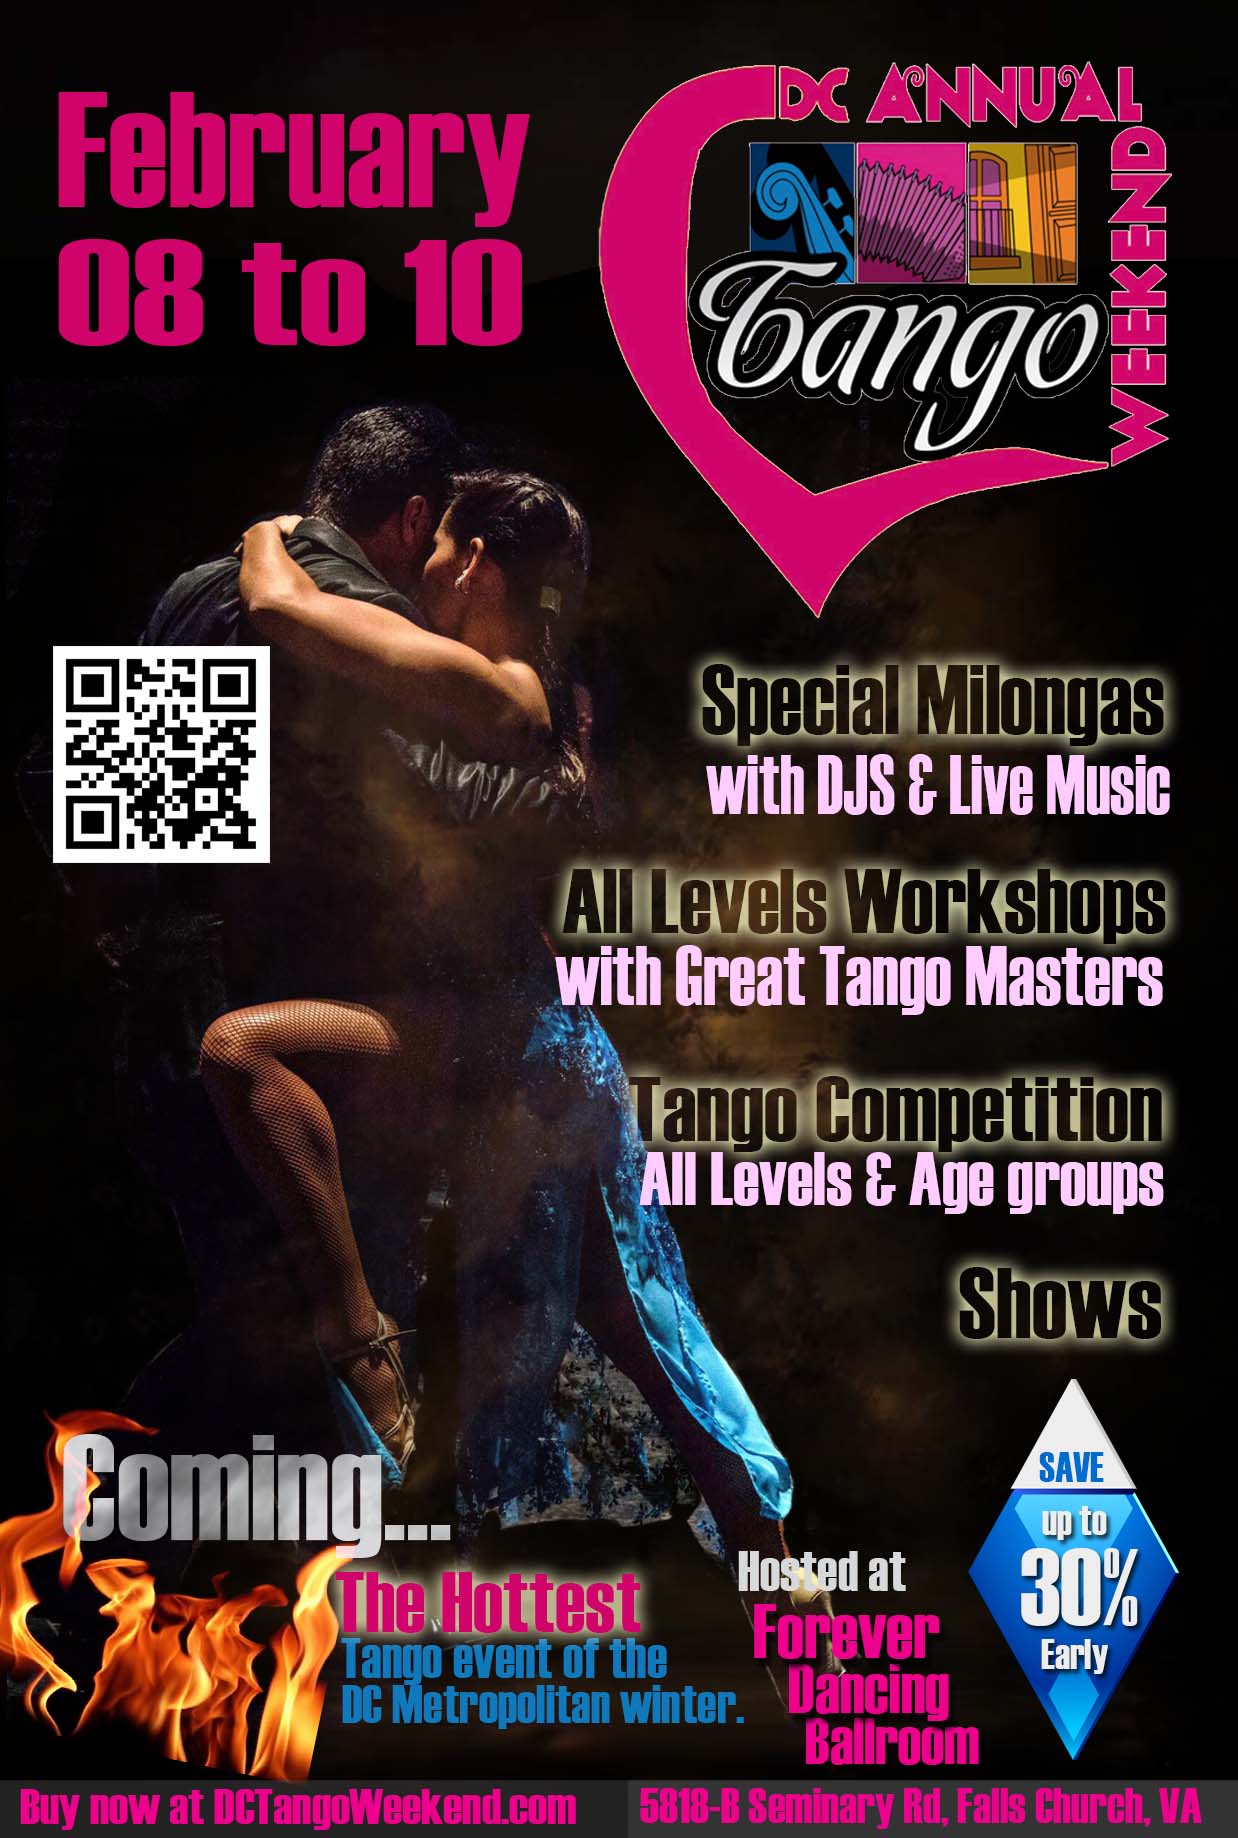 Forever Dancing Ballroom - Dance School, Shows & Events